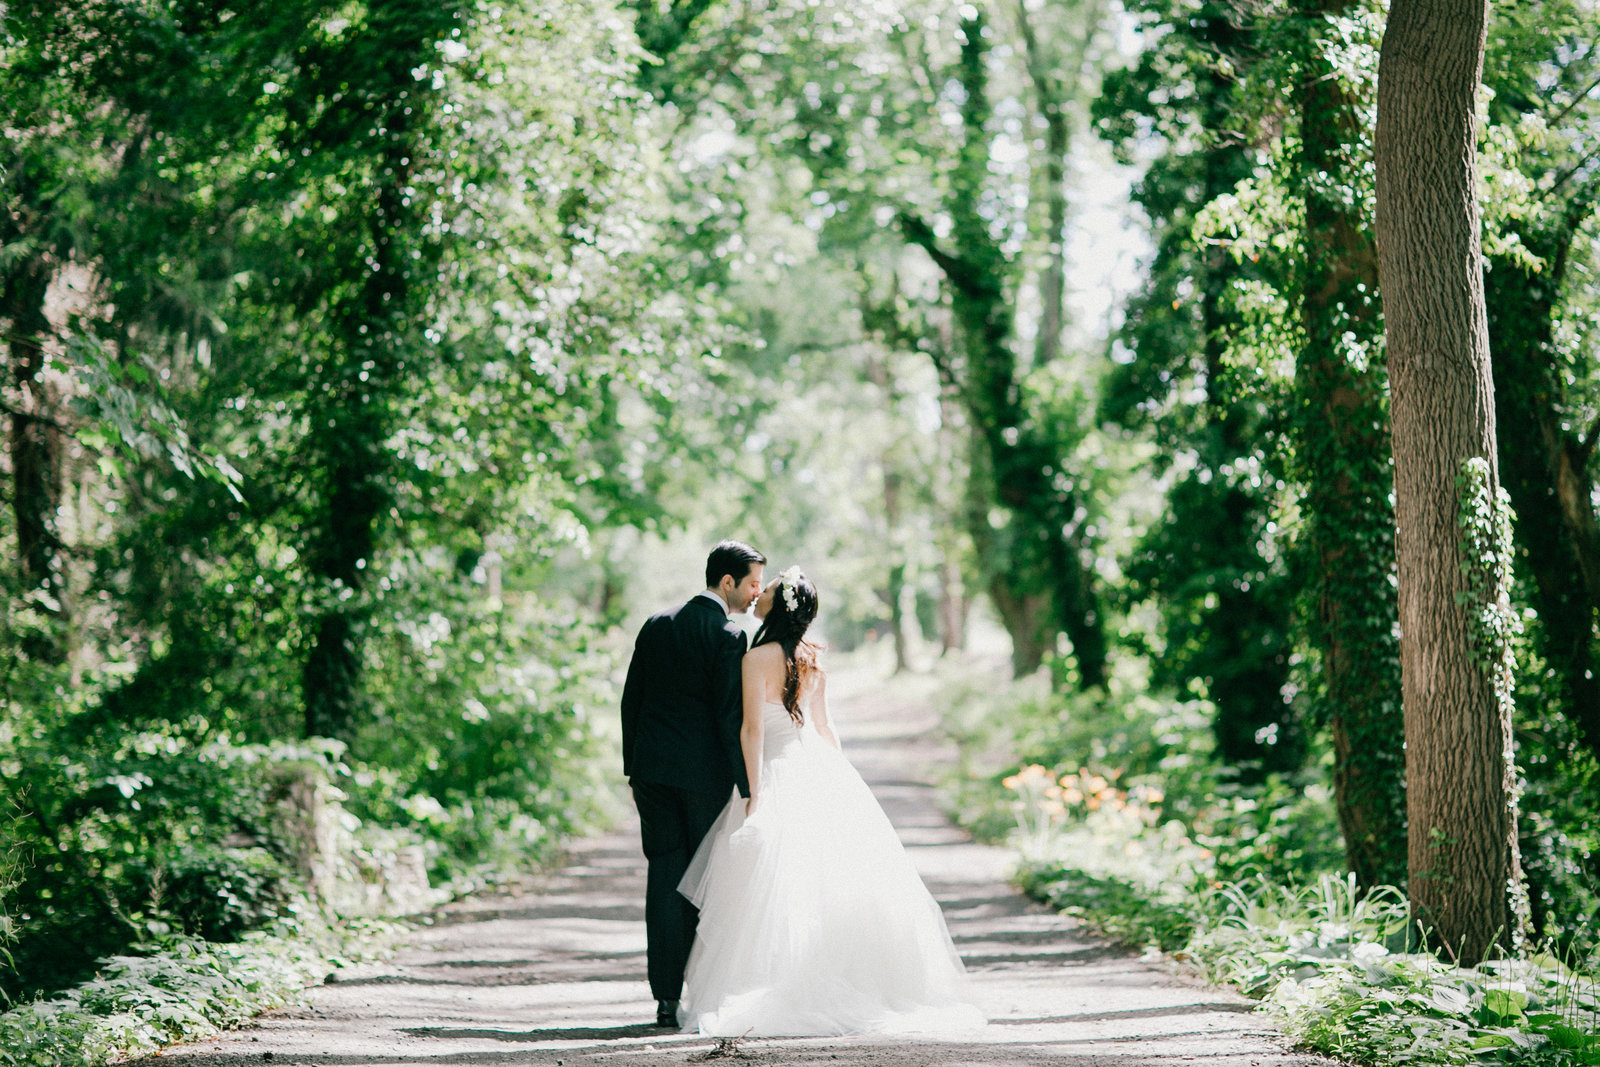 Bride and groom walking along the path at this woodsy wedding venue.